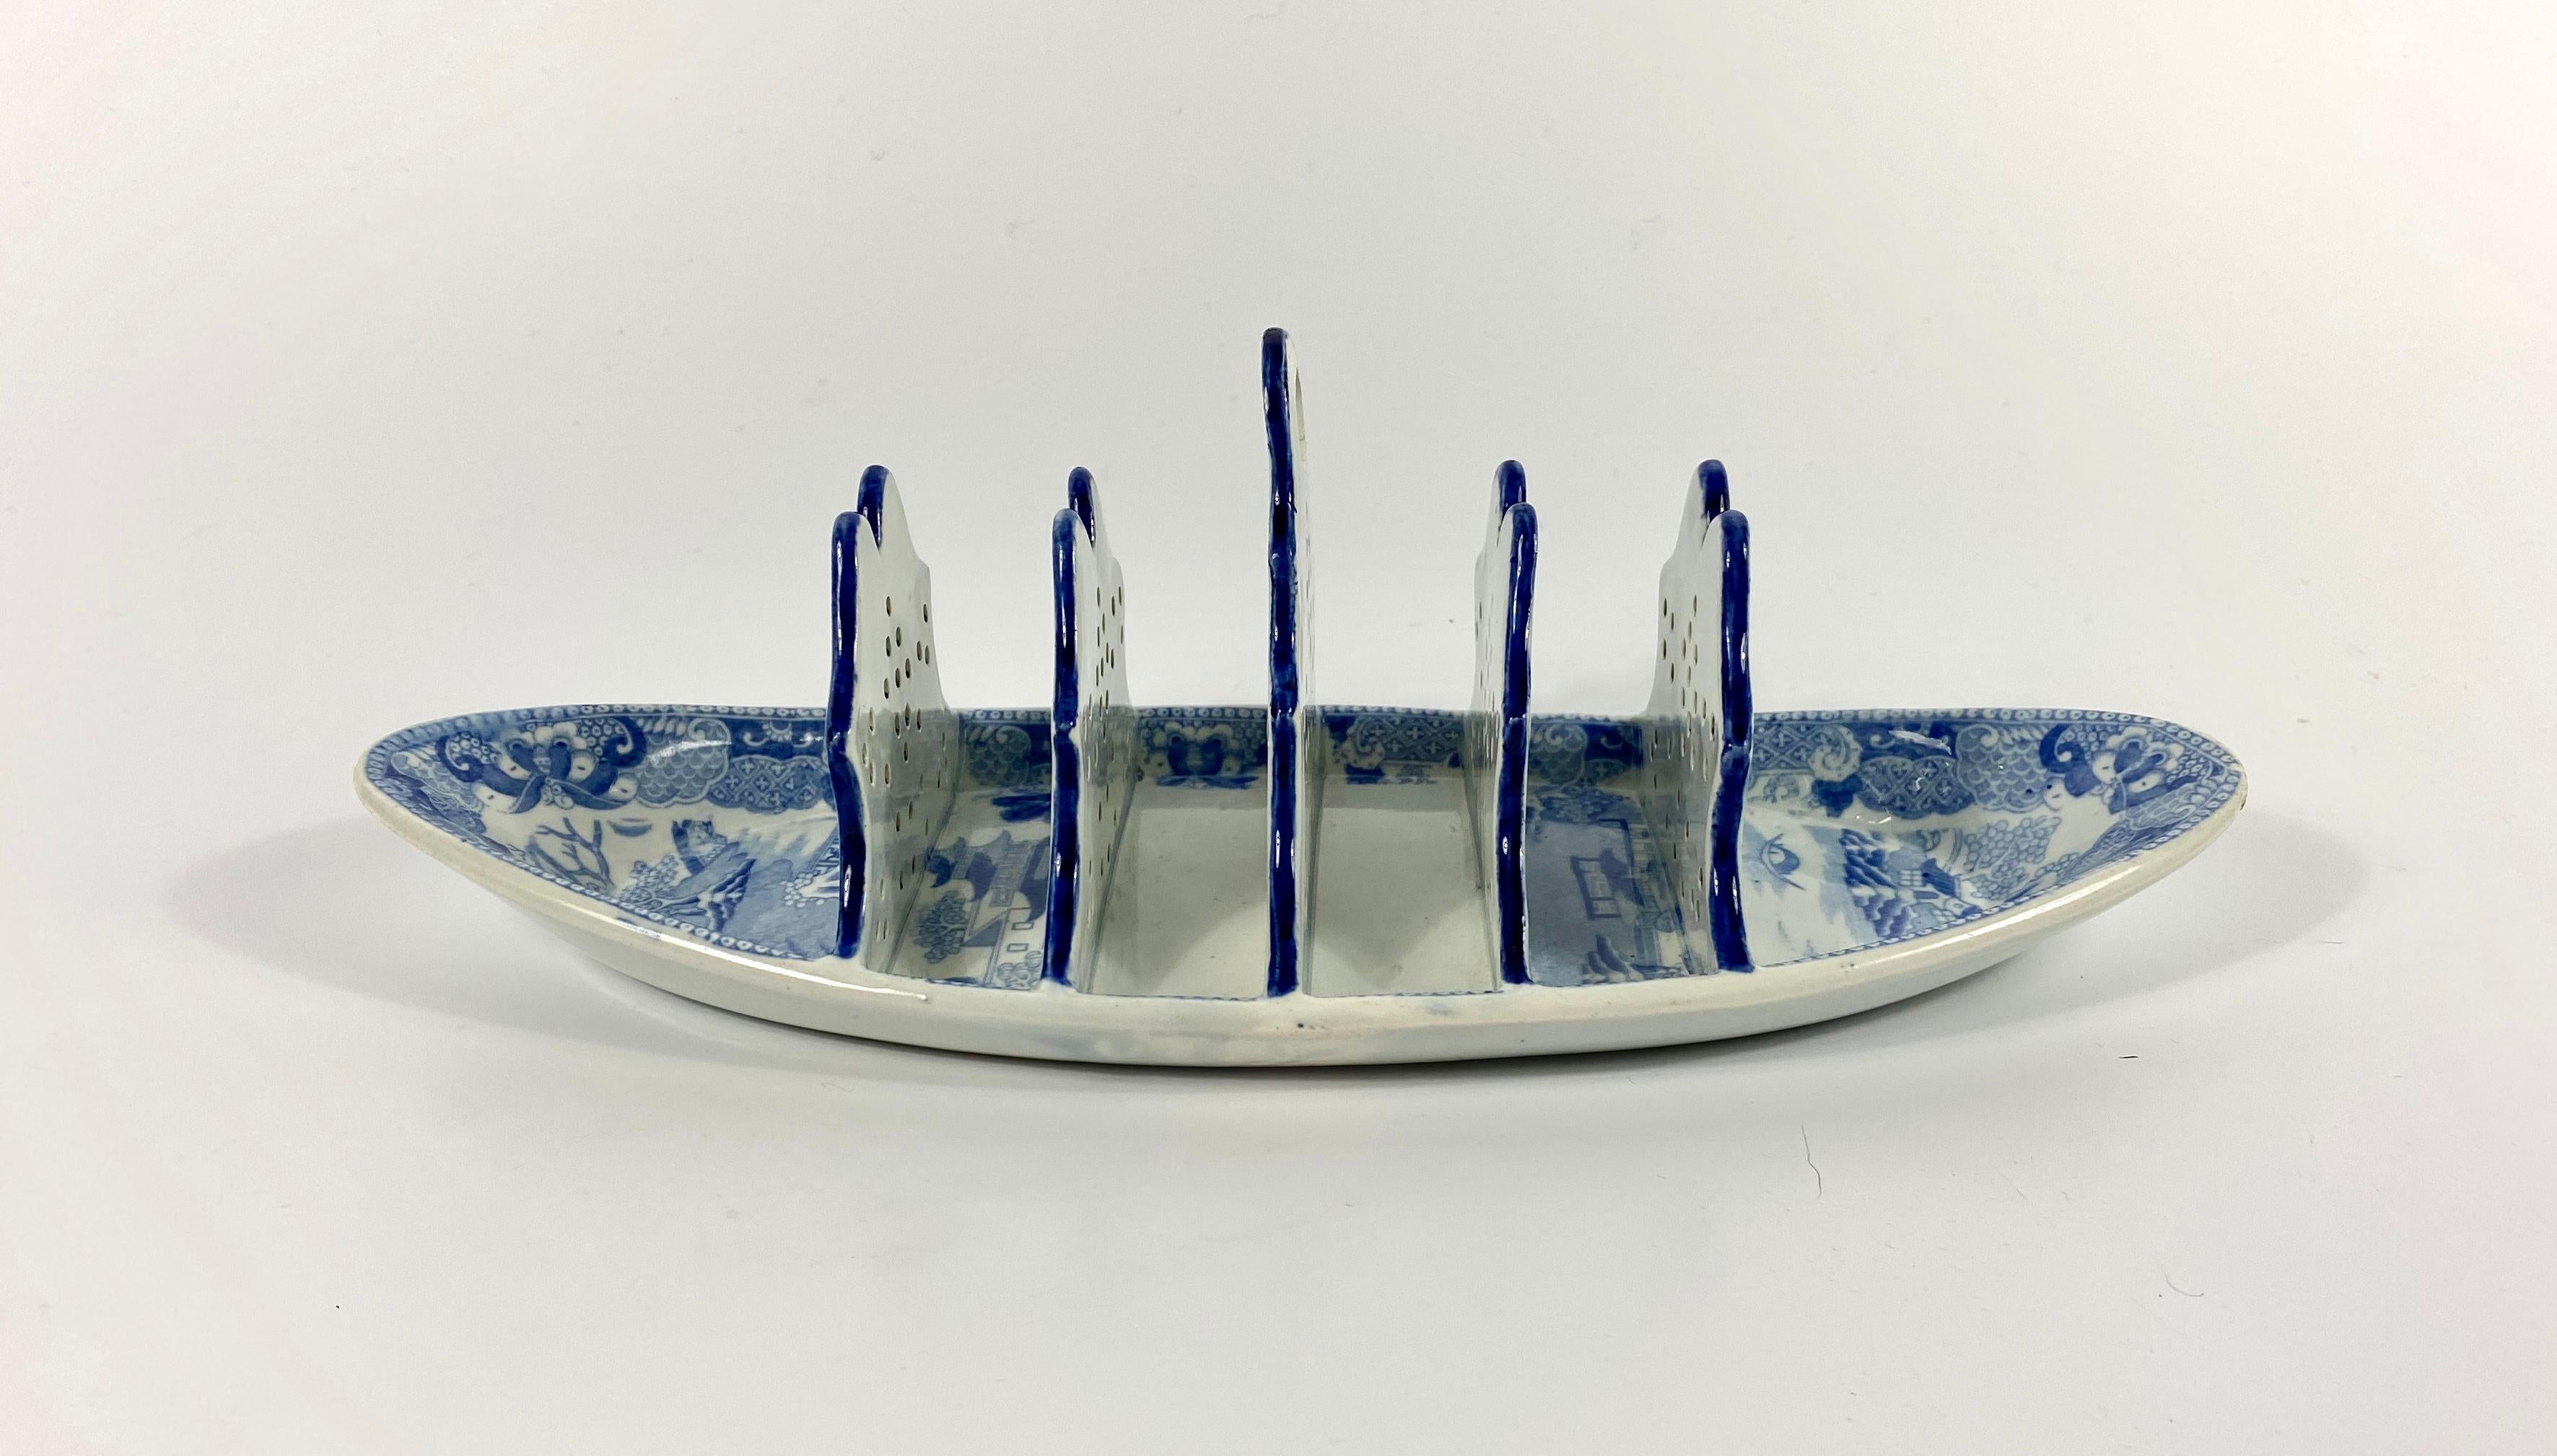 £290.00
Rare Spode pottery toast rack, circa 1820. The boat shaped toast rack, with five shaped, and pierced dividers, and printed in the ‘Willow’ pattern. All beneath a Pearlware glaze.
Printed ‘SPODE’ in underglaze blue, and impressed ‘Spode